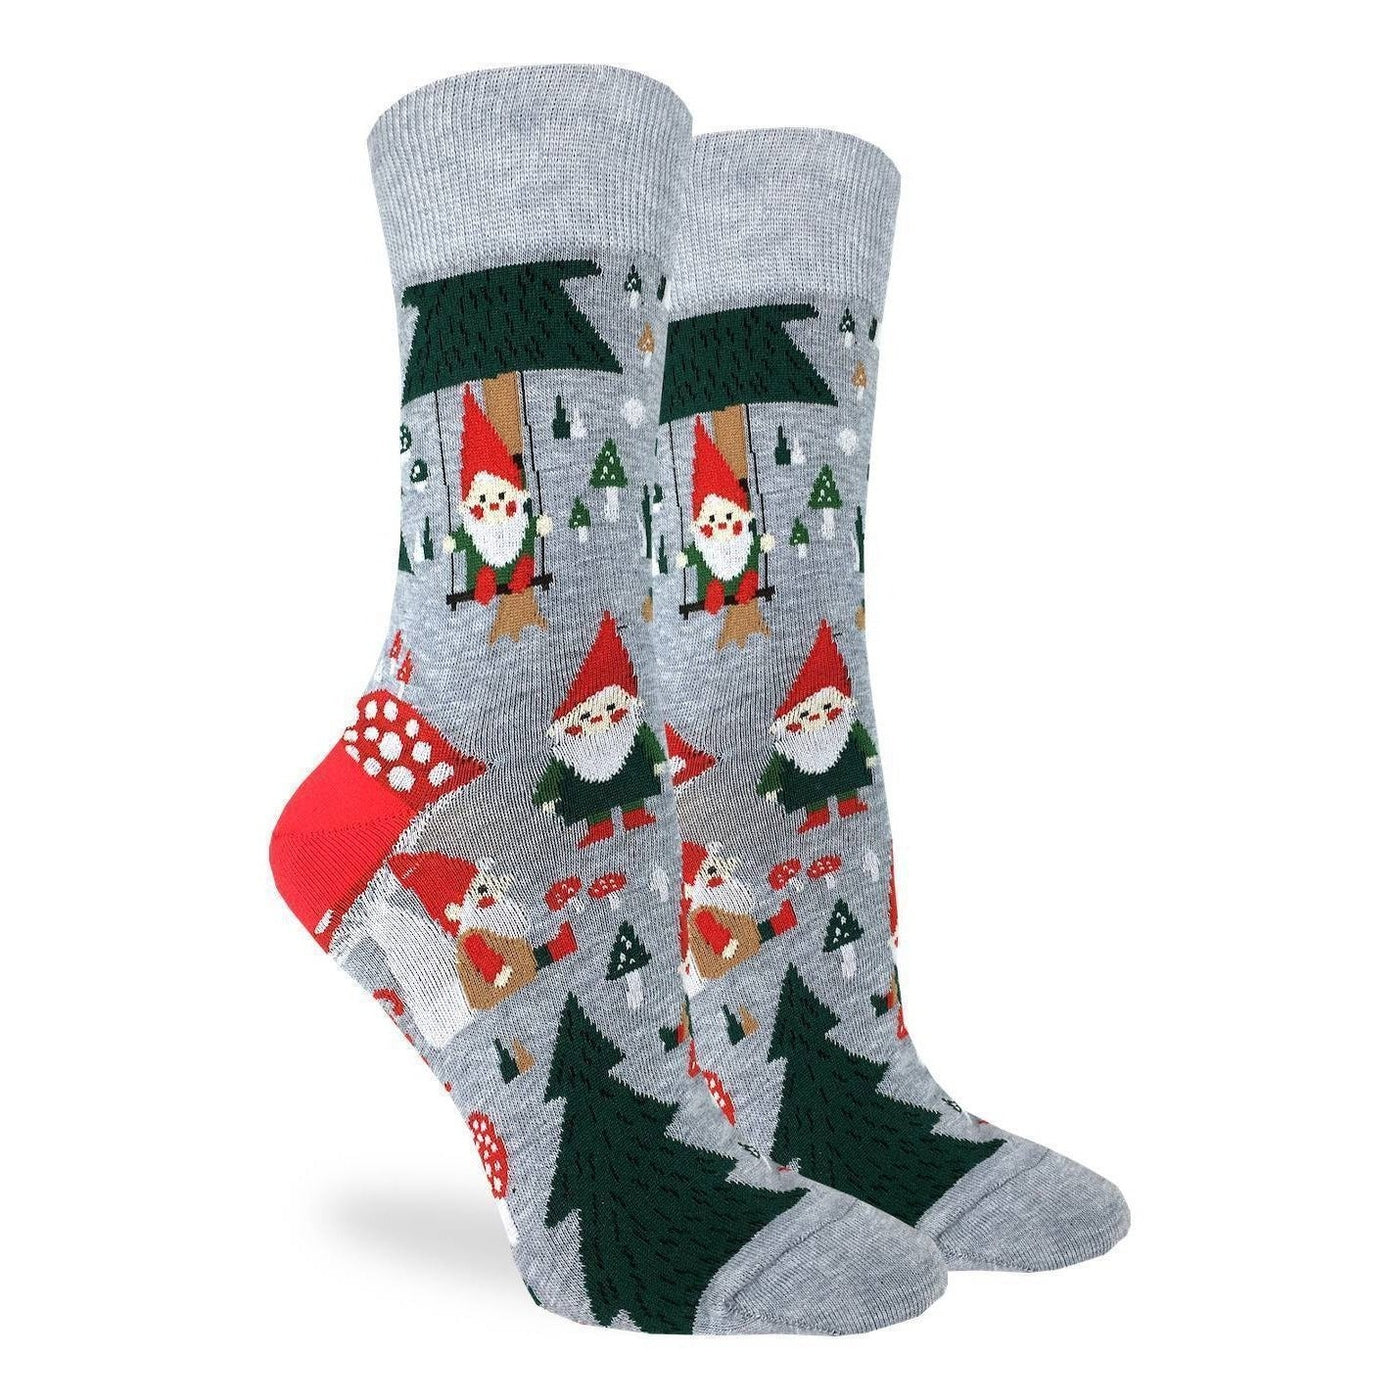 "Woodland Gnomes" Cotton Crew Socks by Good Luck Sock